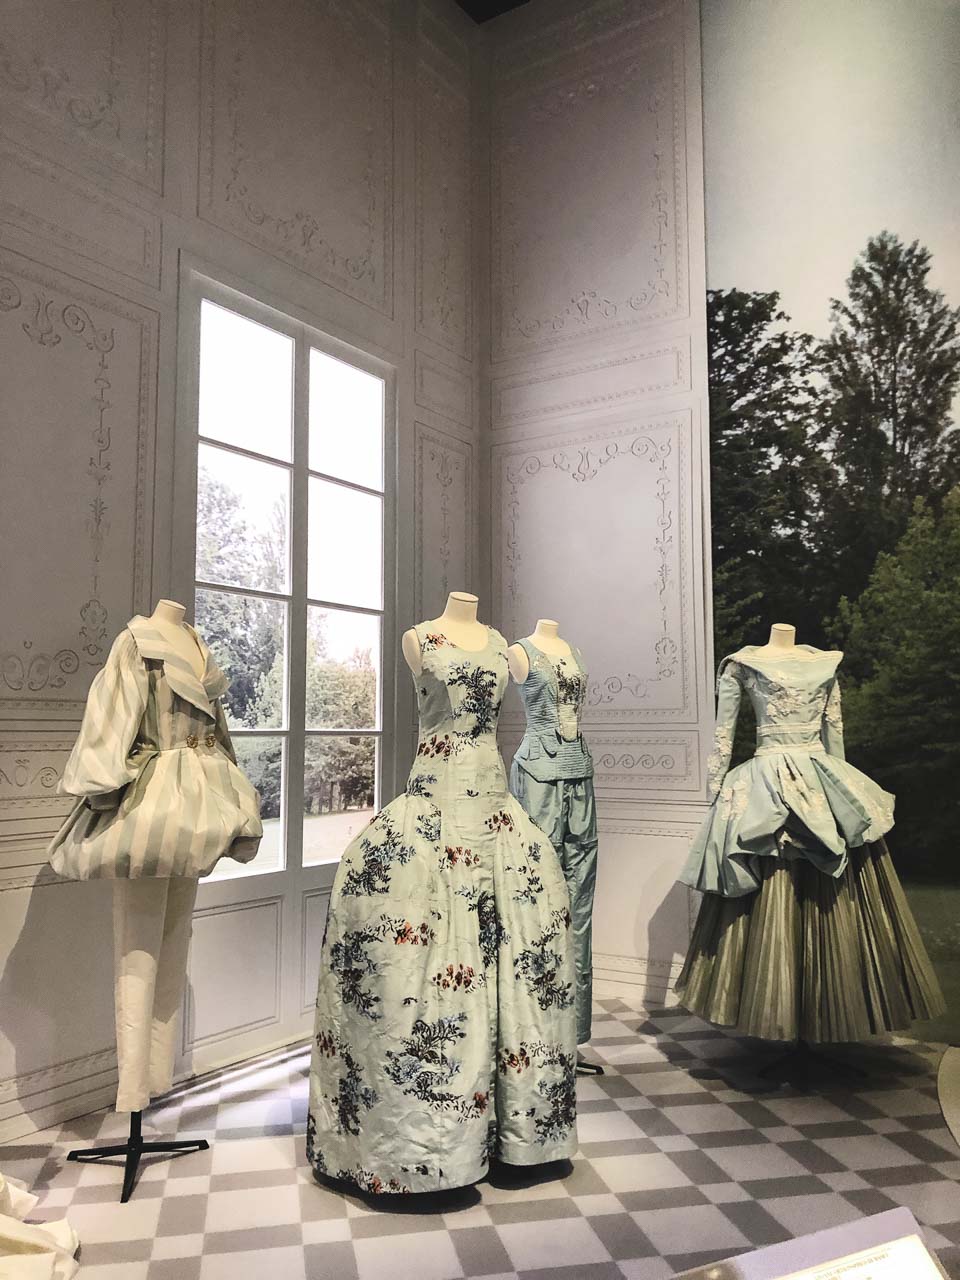 Dior creations at the Christian Dior: Designer of Dreams exhibition at the V&A Museum in London